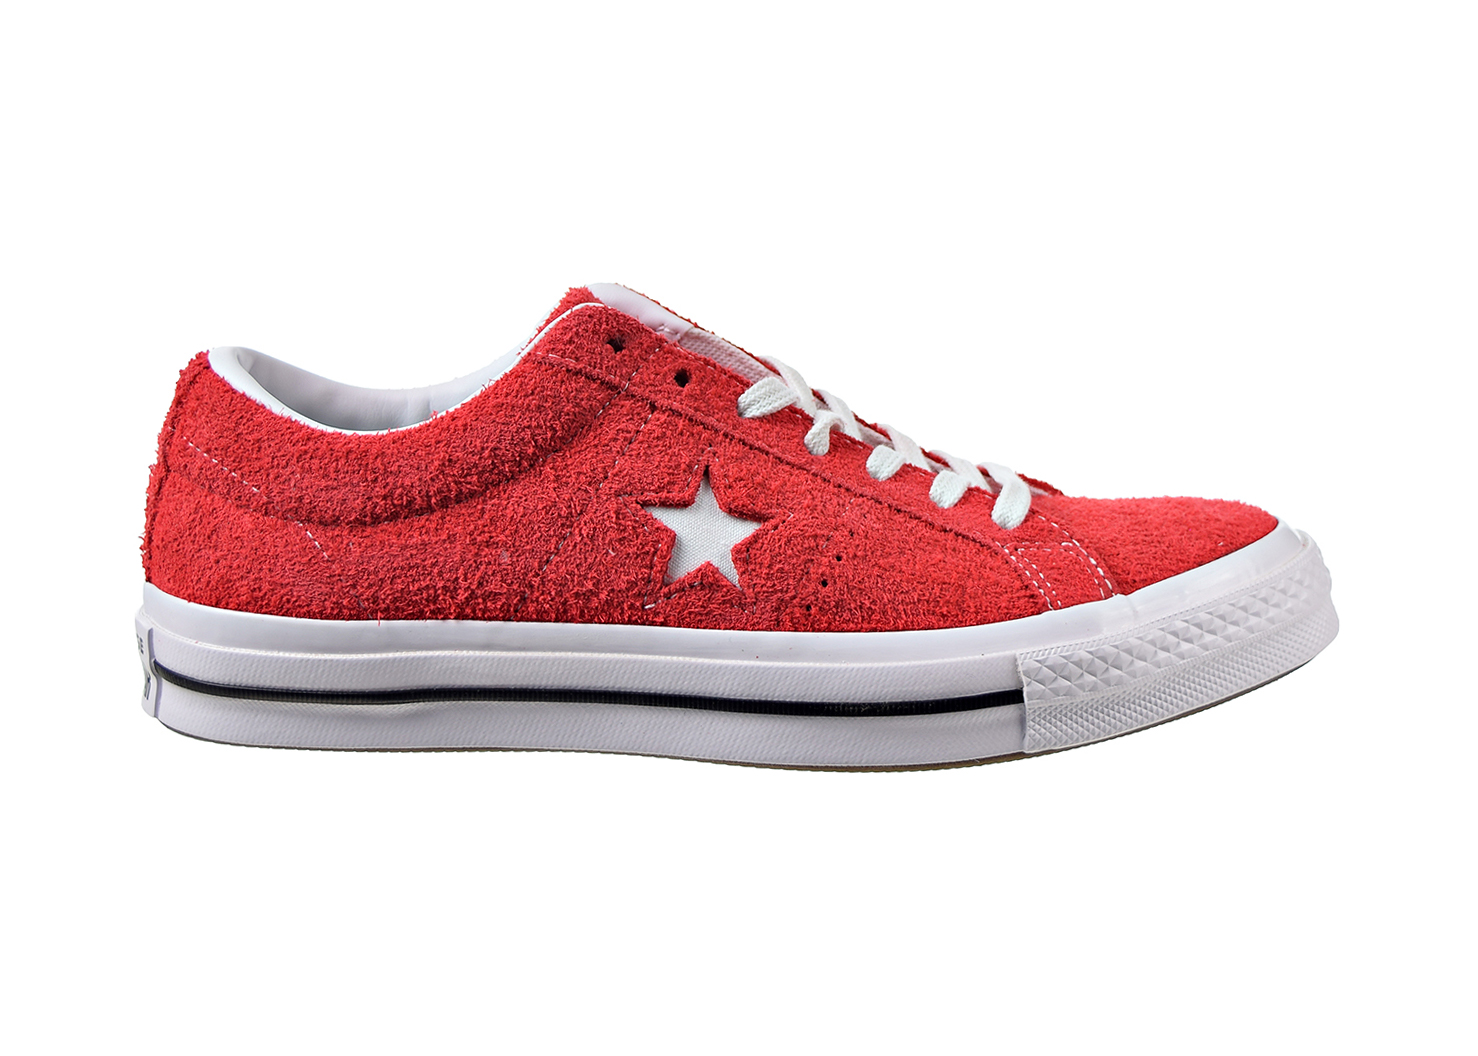 Converse One Star Ox Suede Red Men's   C   US